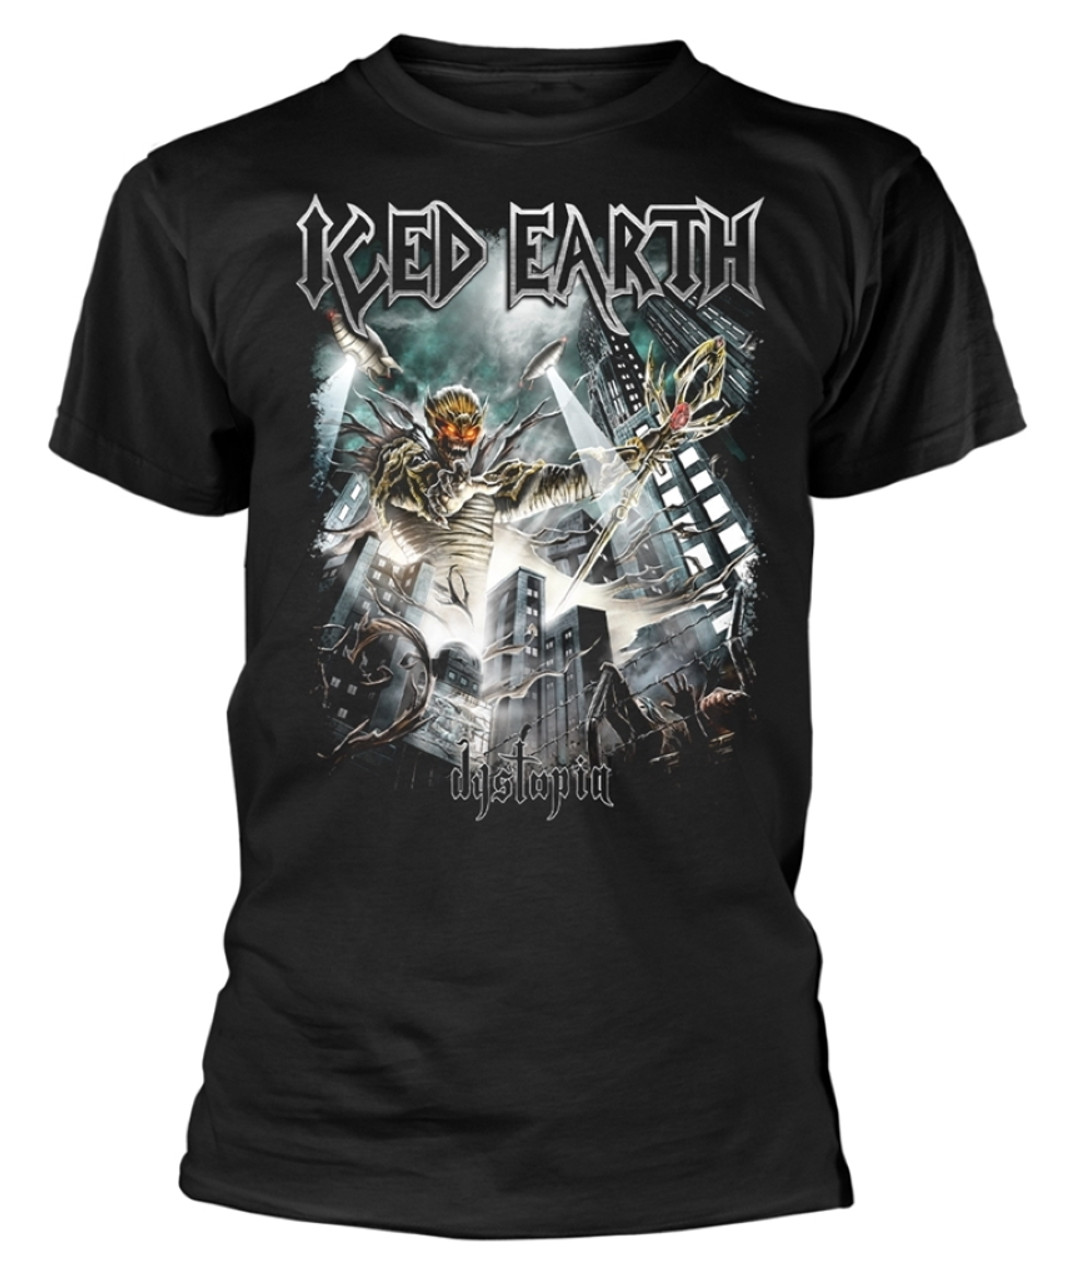 Iced Earth 'Dystopia' (Black) T-Shirt